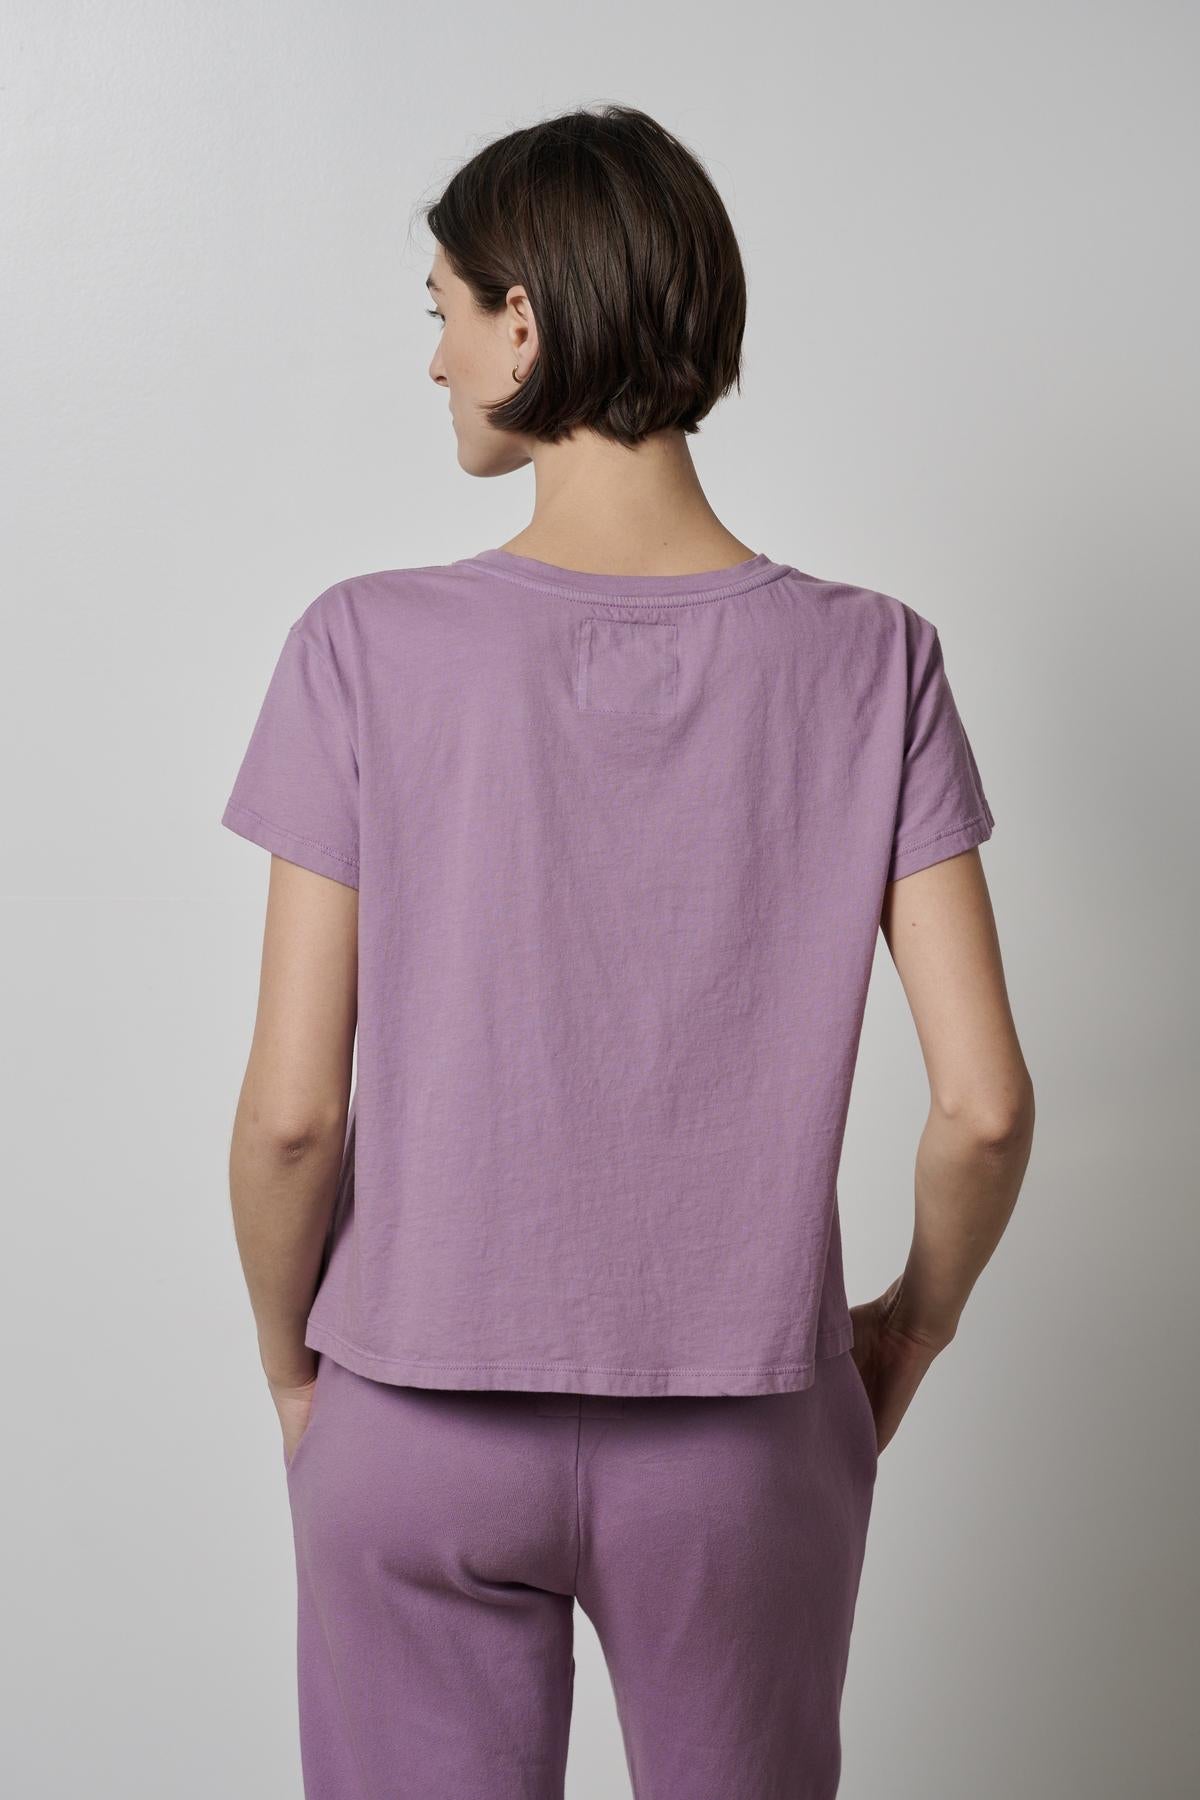 The back view of a woman wearing a Velvet by Jenny Graham TOPANGA TEE and pants.-35783186809025